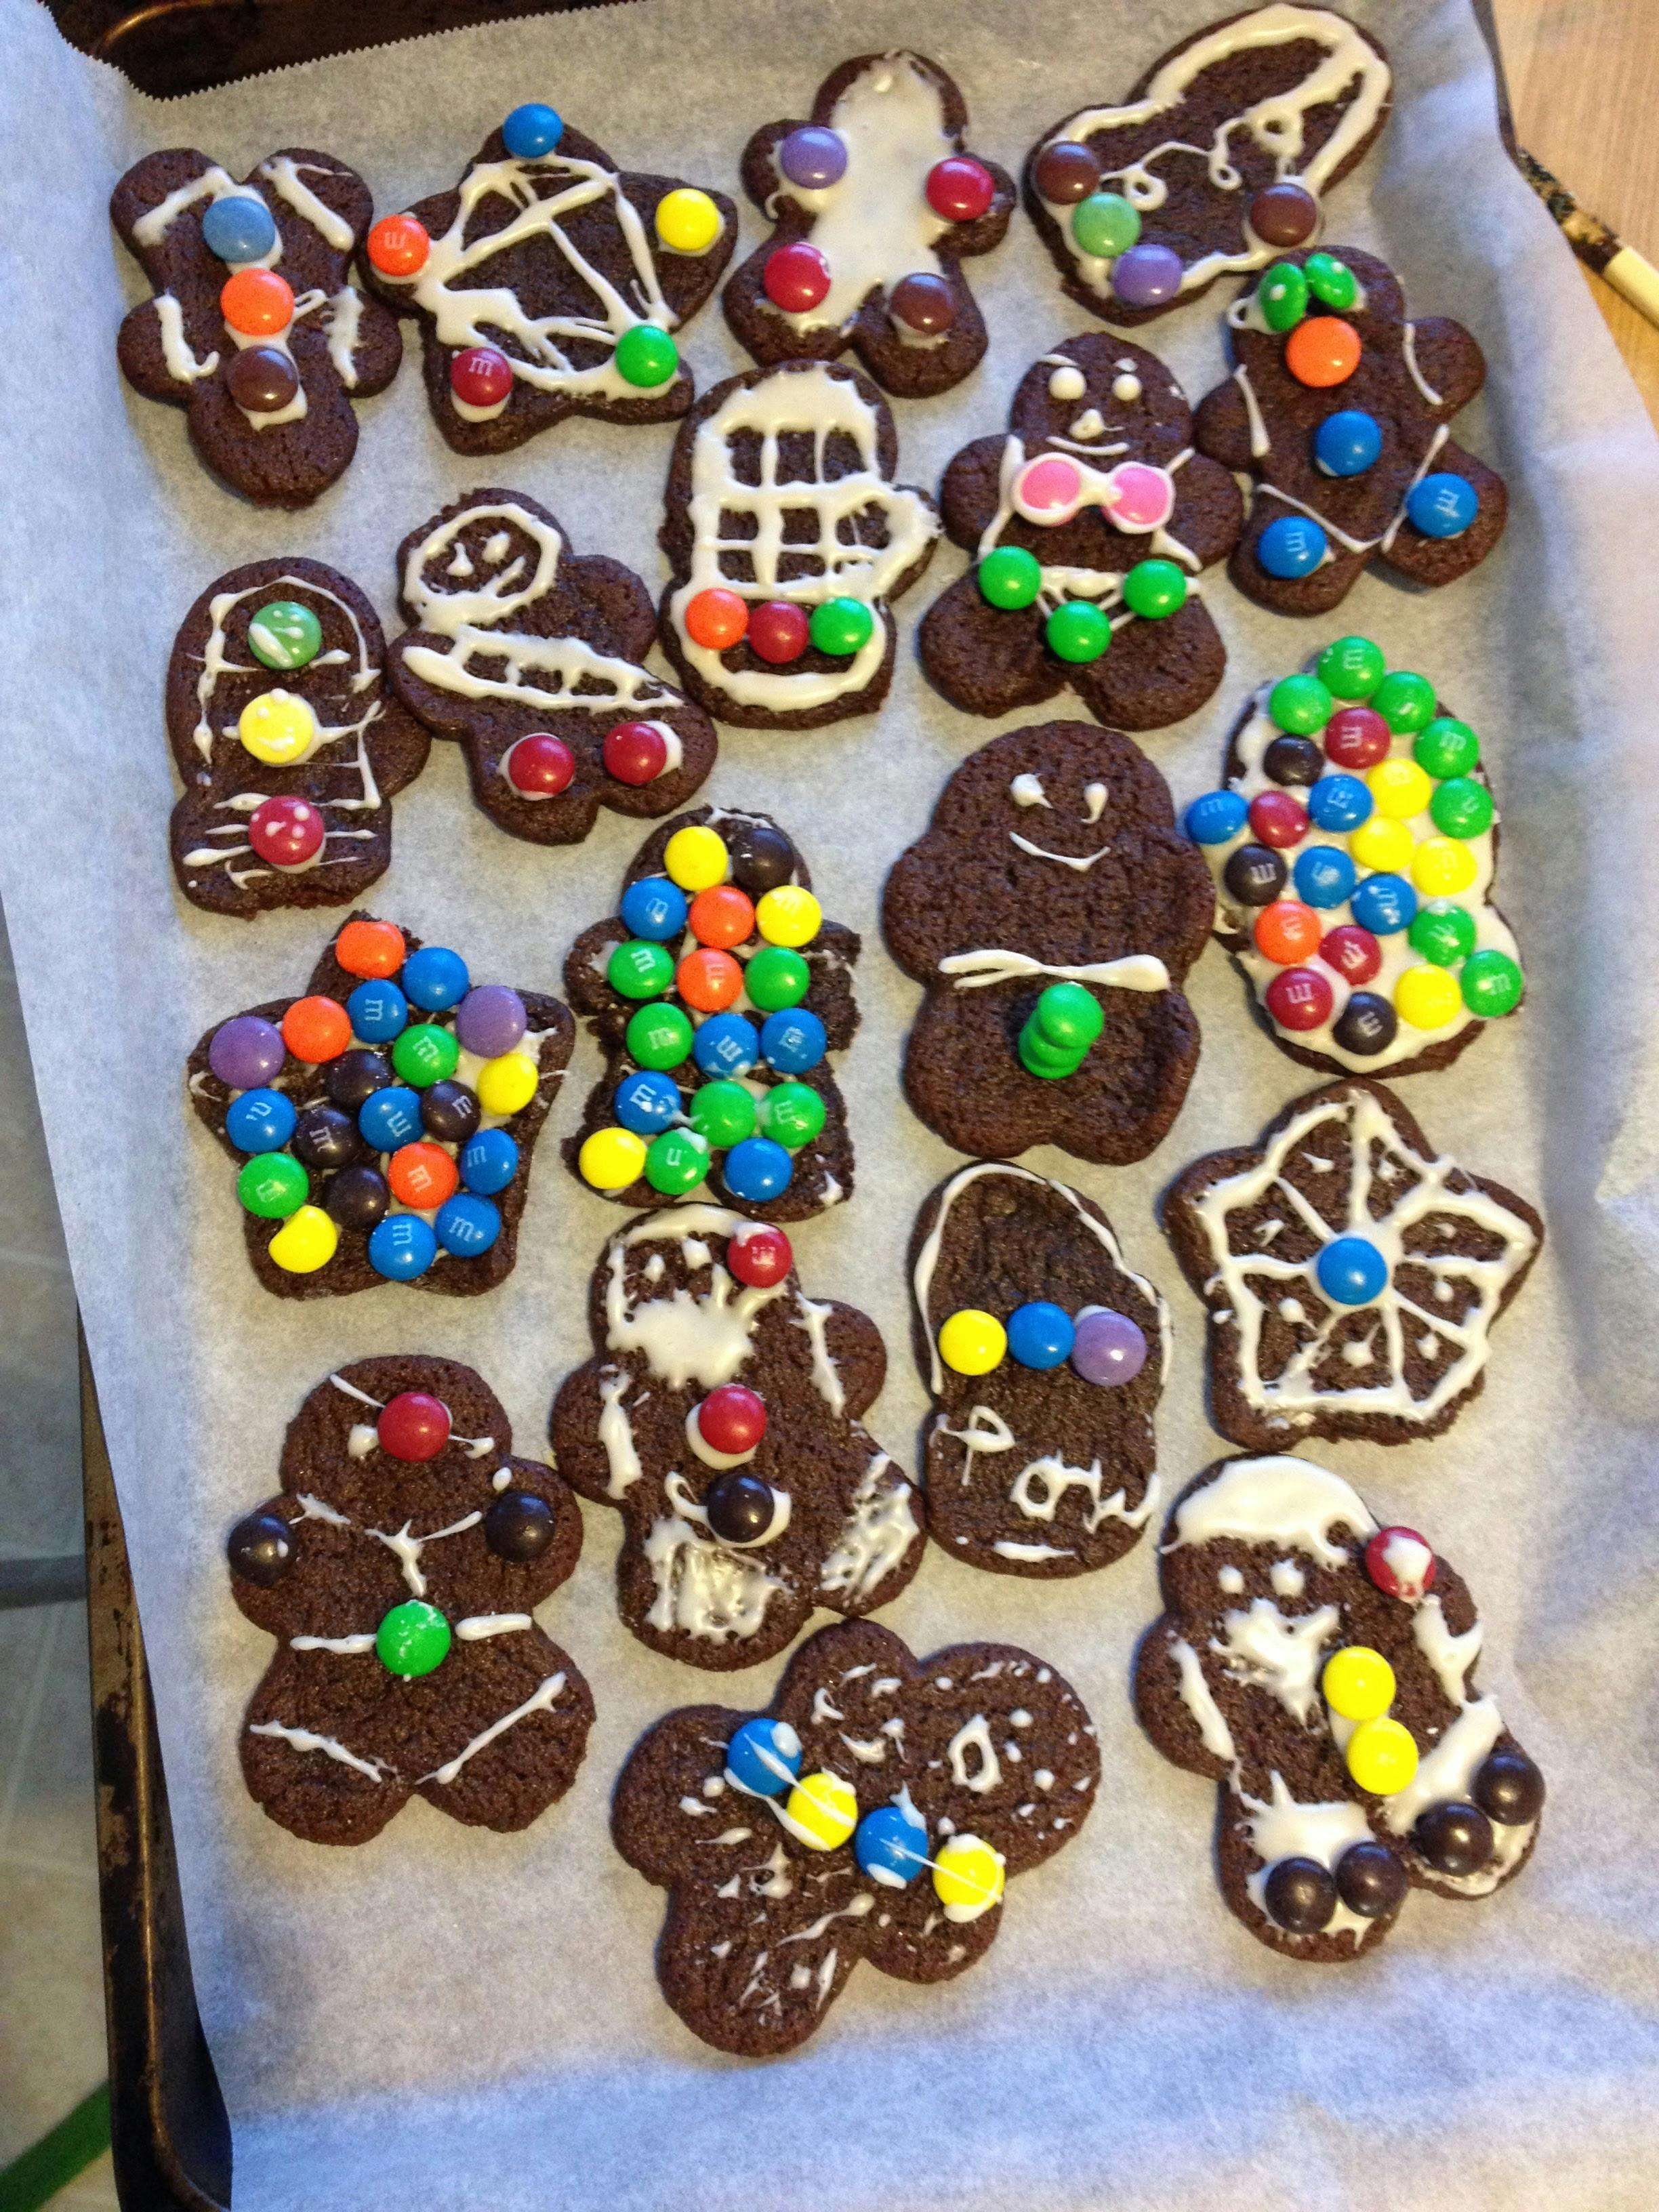 Different gingerbread cookies decorated with smarties.